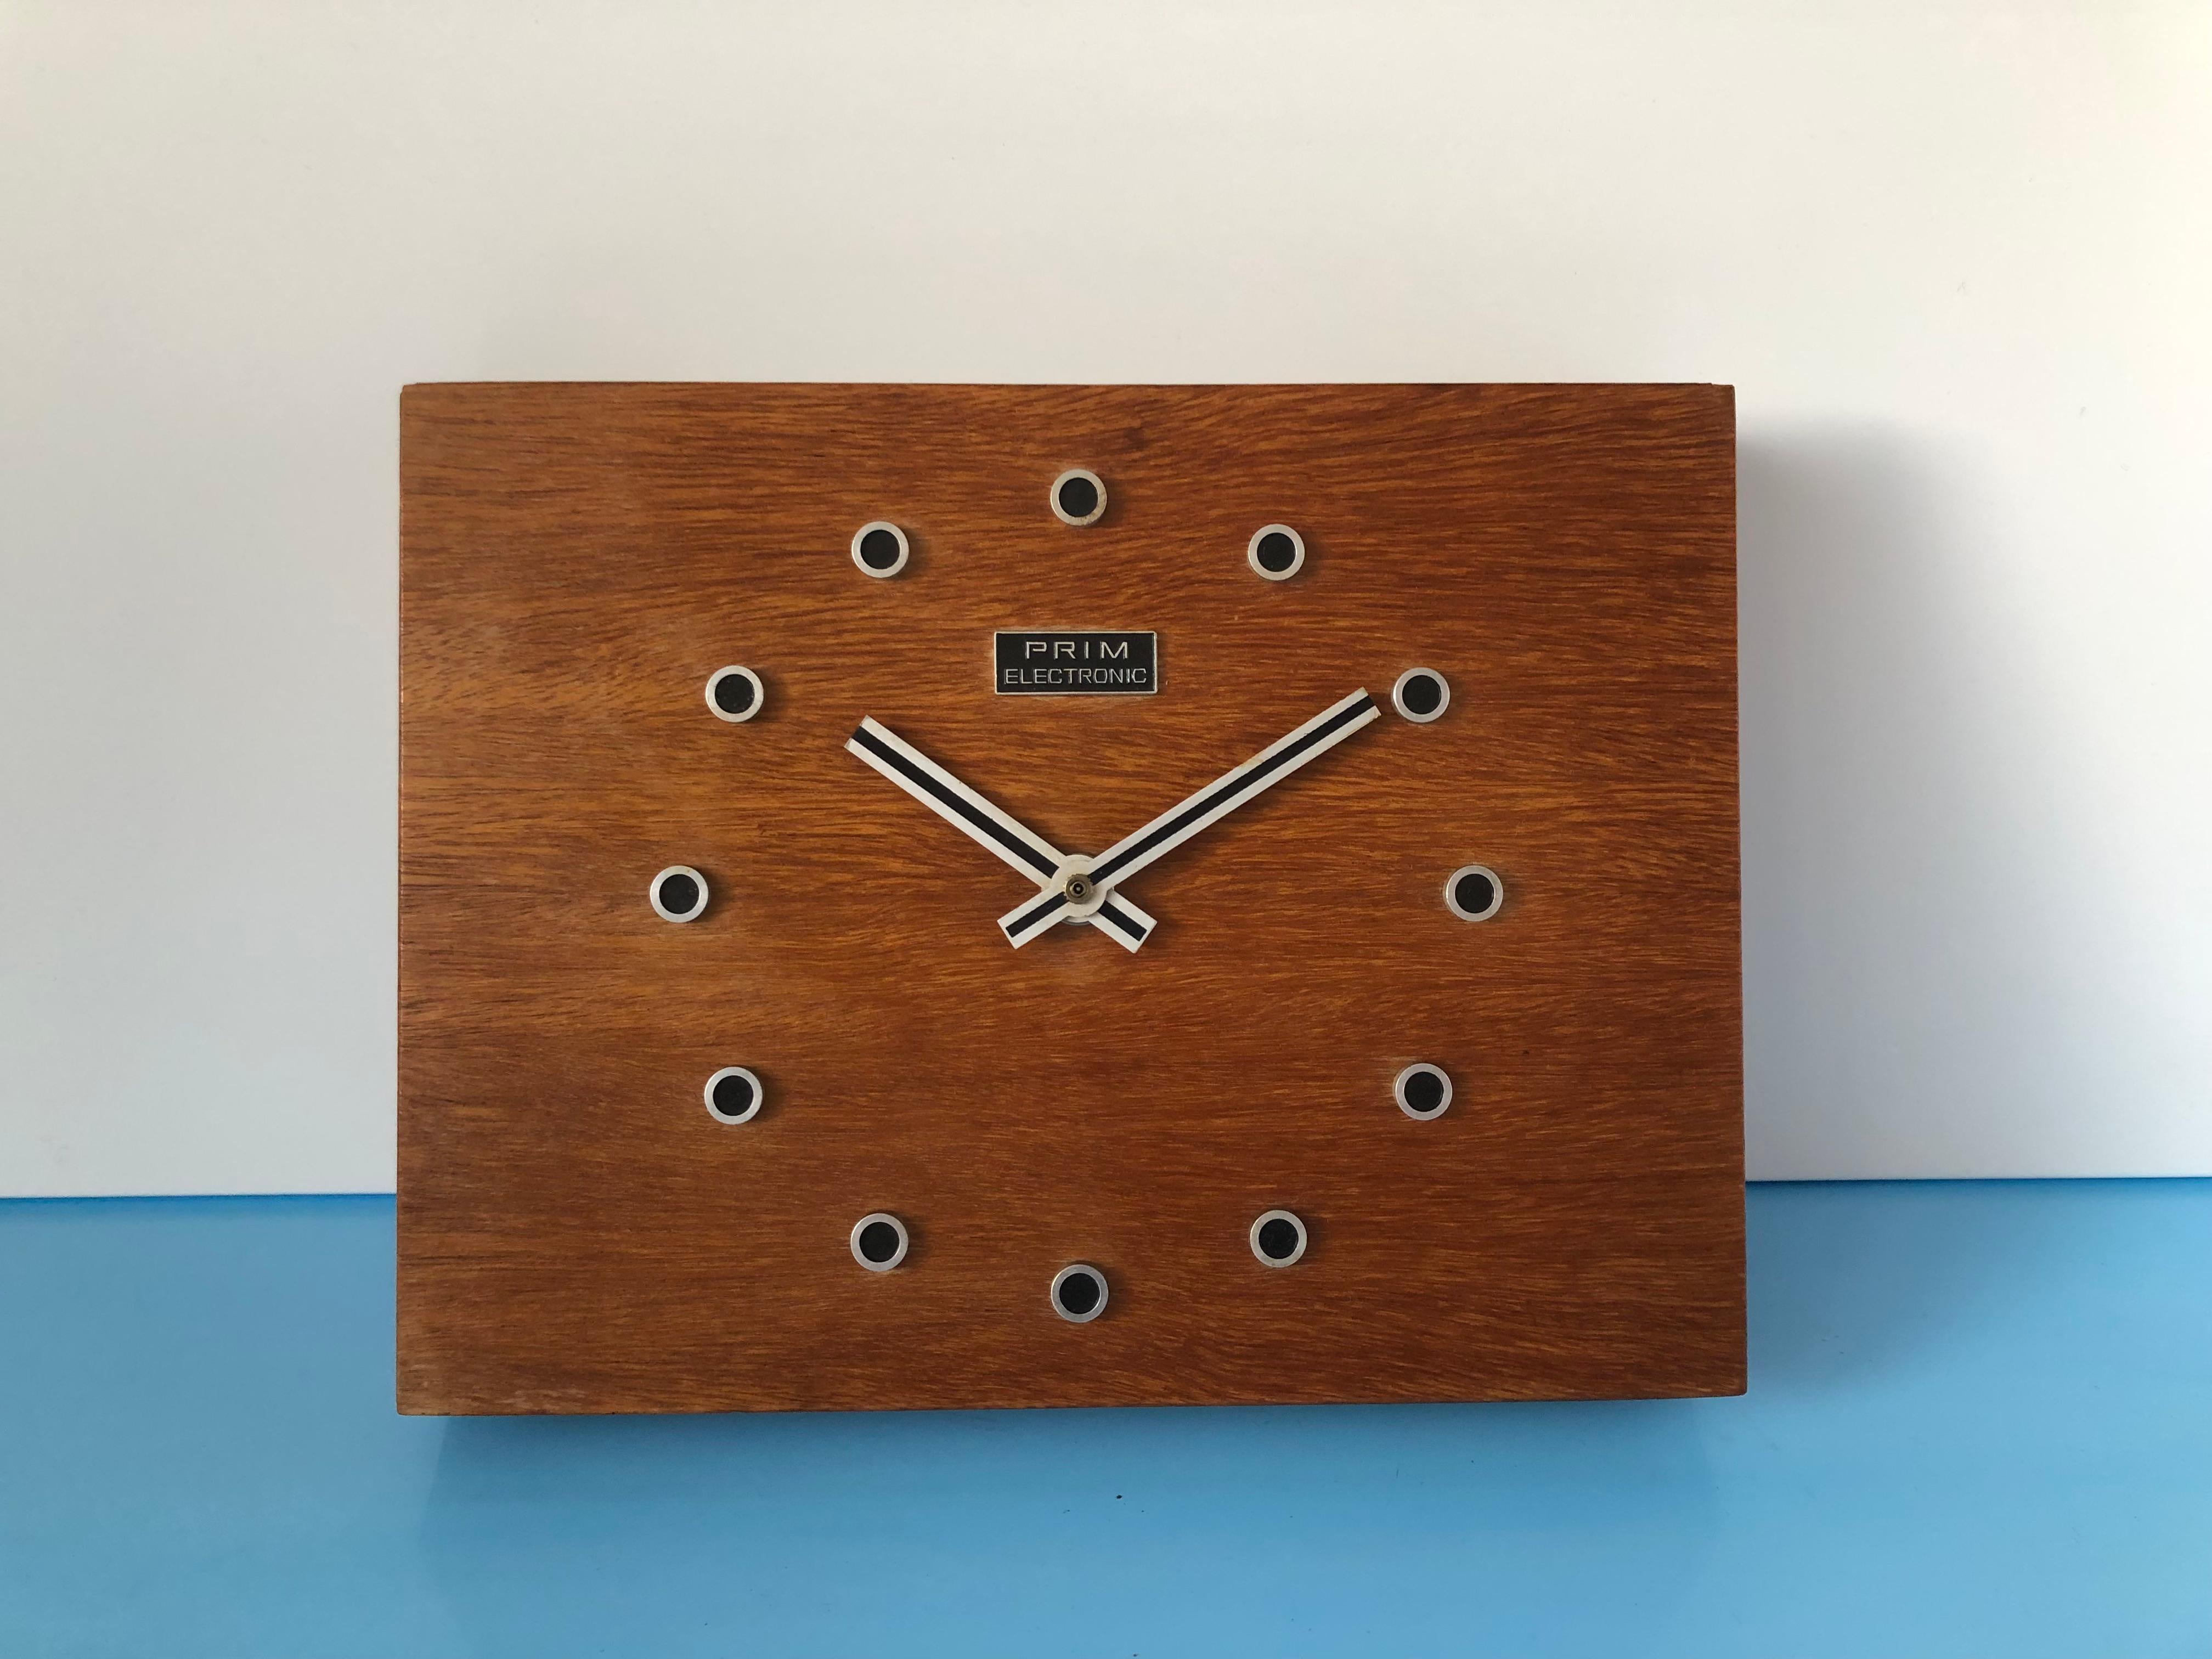 Wooden wall clock Prim electronic from Czechoslovakia.
The clock is in original good working condition,
Battery operated clock.

